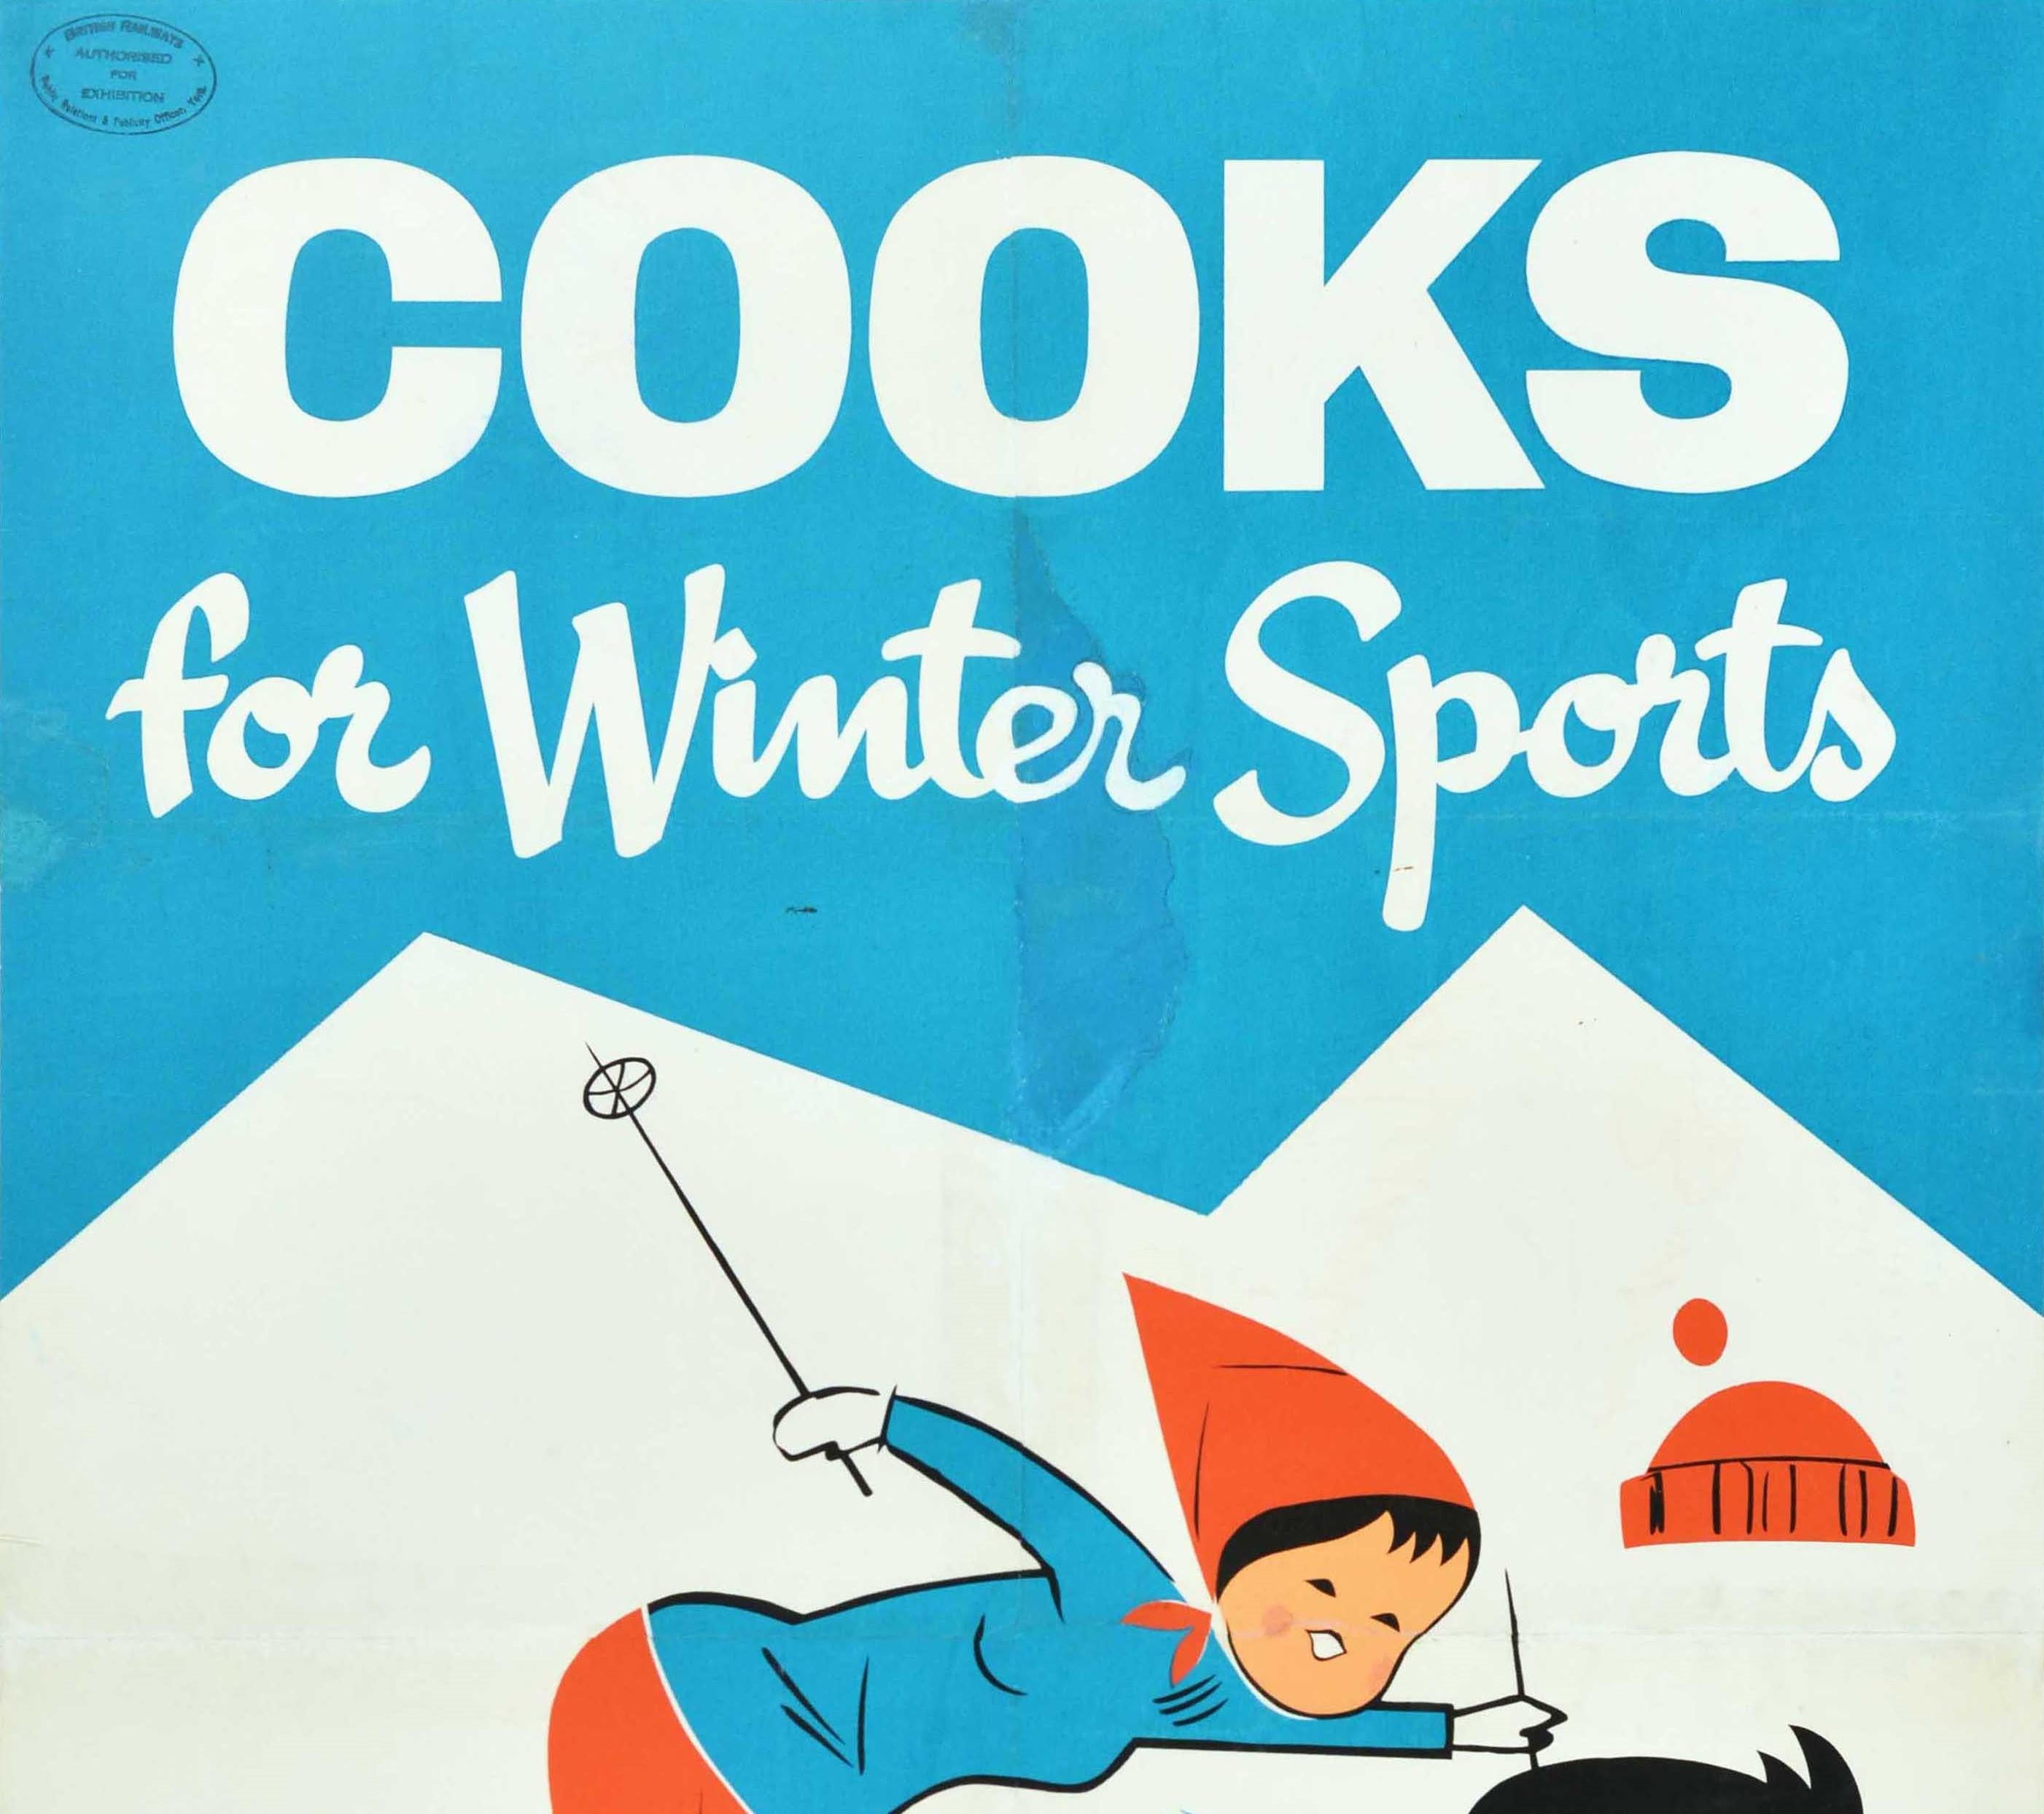 Original vintage ski travel poster - Cooks for Winter Sports Travel by British Railways Train and Steamer Services - featuring a fun design depicting a couple racing down a snowy mountain with two peaks below the title text on the blue sky above,